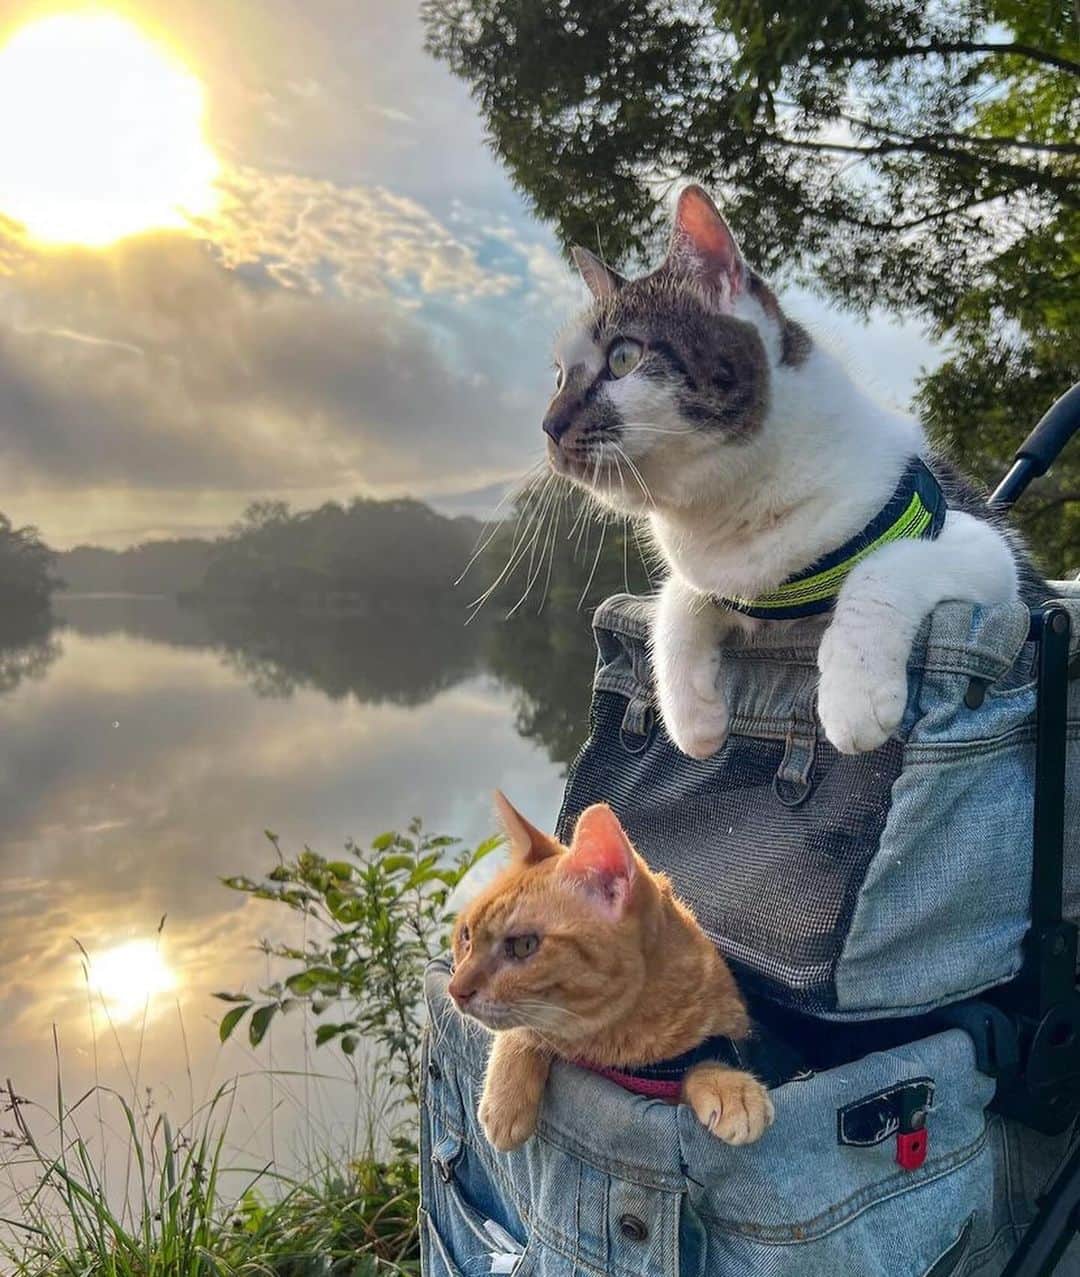 Bolt and Keelのインスタグラム：「Meet The Traveling Cats!!🐱✨ Daikichi & Fuku-chan enjoy their time exploring Japan 🇯🇵 🐾  @adventrapets ➡️ @the.traveling.cats  —————————————————— Follow @adventrapets to meet cute, brave and inspiring adventure pets from all over the world! 🌲🐶🐱🌲  • TAG US IN YOUR POSTS to get your little adventurer featured! #adventrapets ——————————————————」